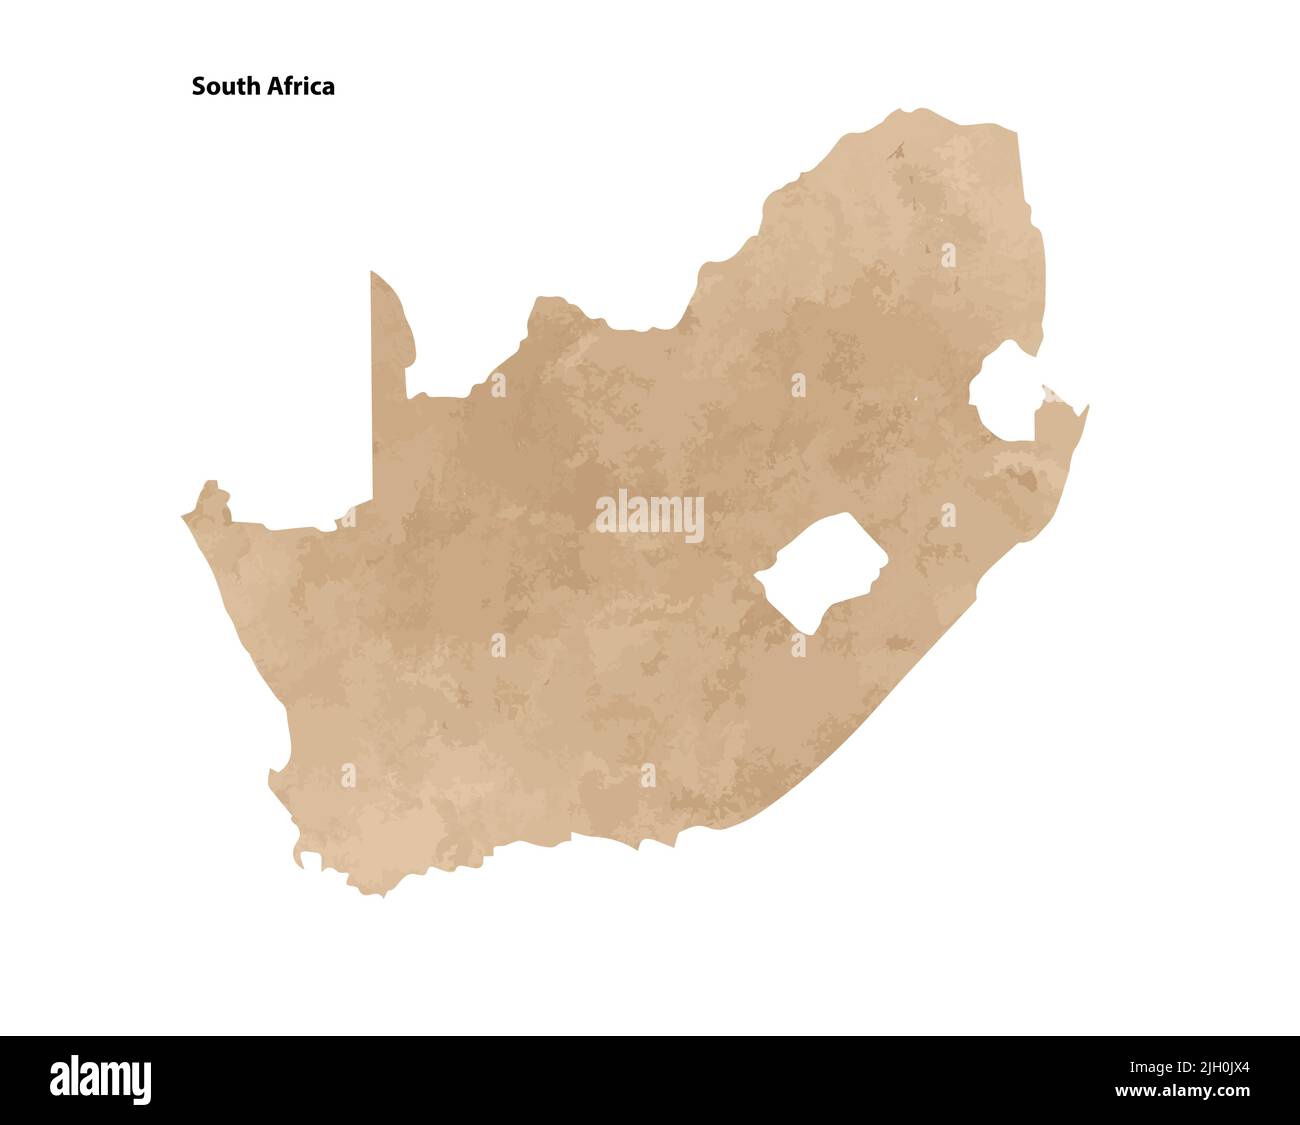 Old vintage paper textured map of South Africa Country - Vector illustration Stock Vector